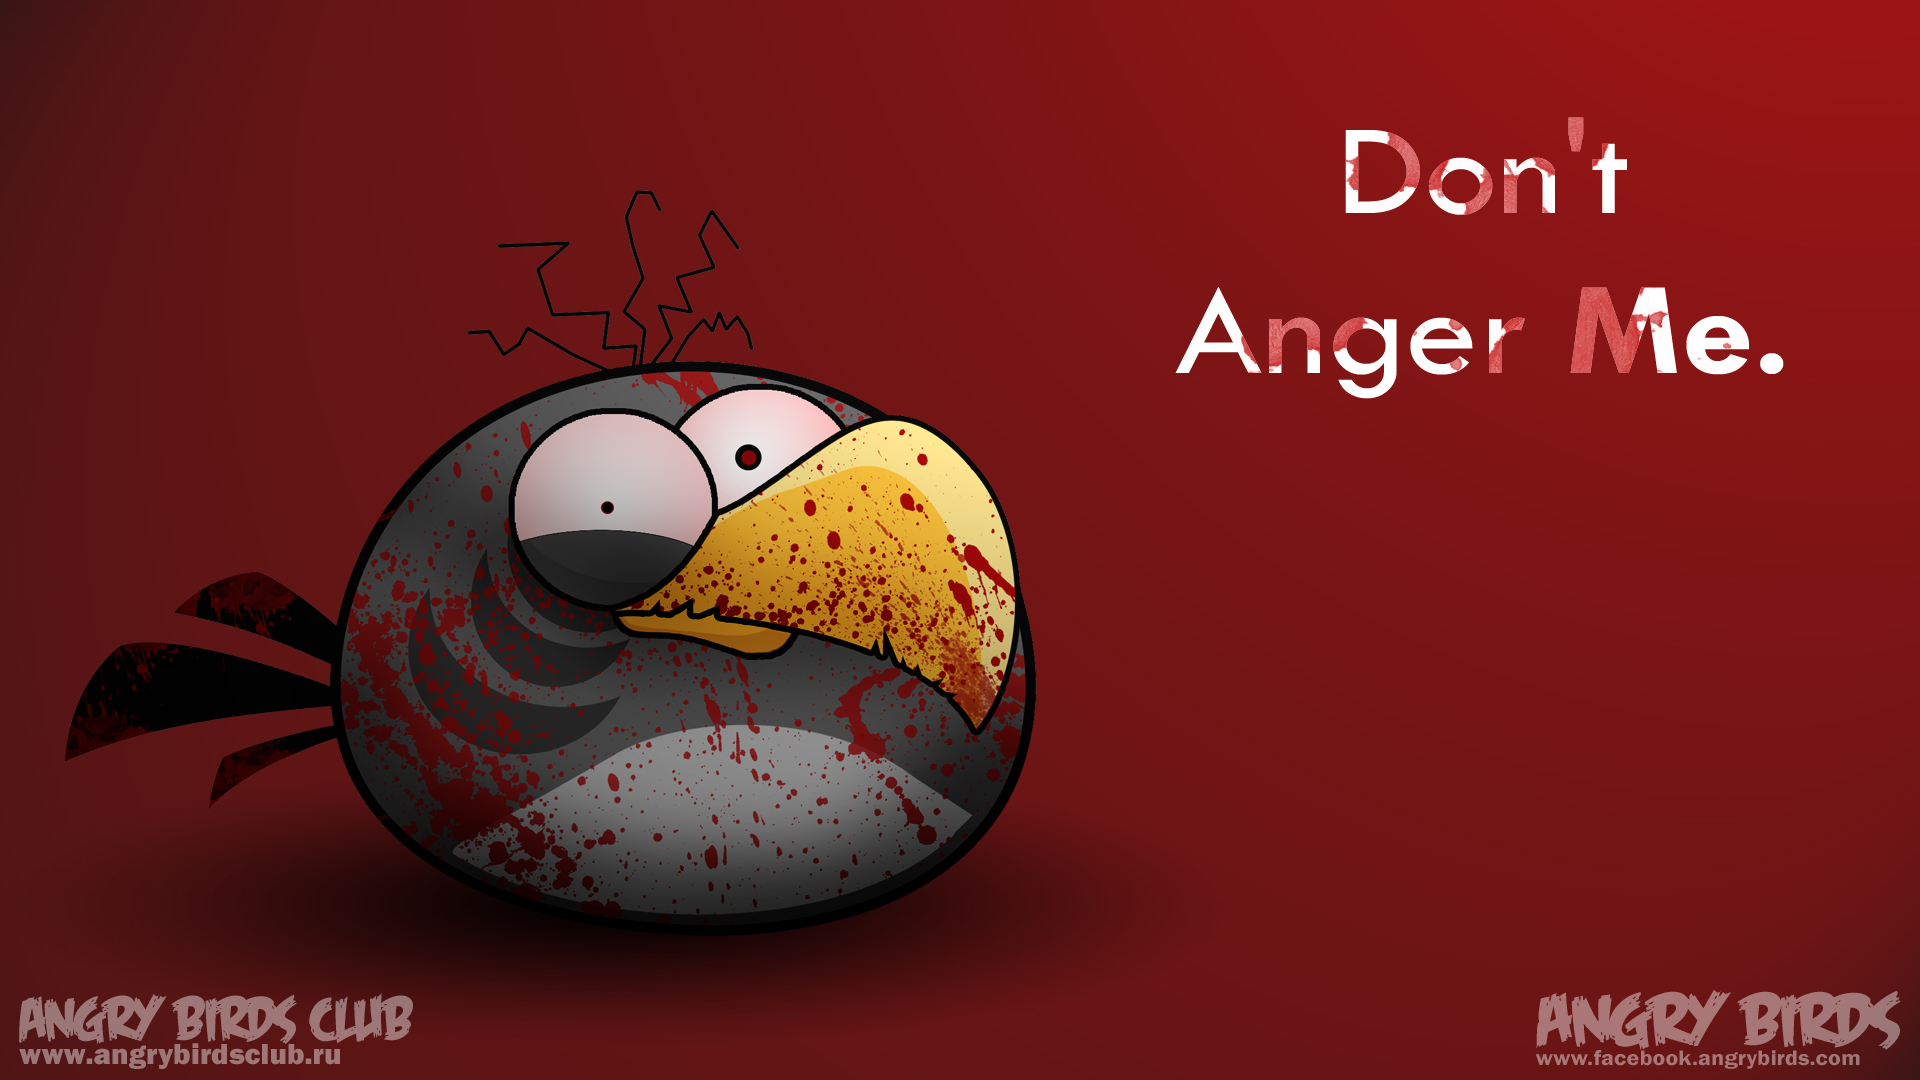 Angry Birds Wallpaper Space Bash Desktop Pc 1920x1080png Picture 1920x1080